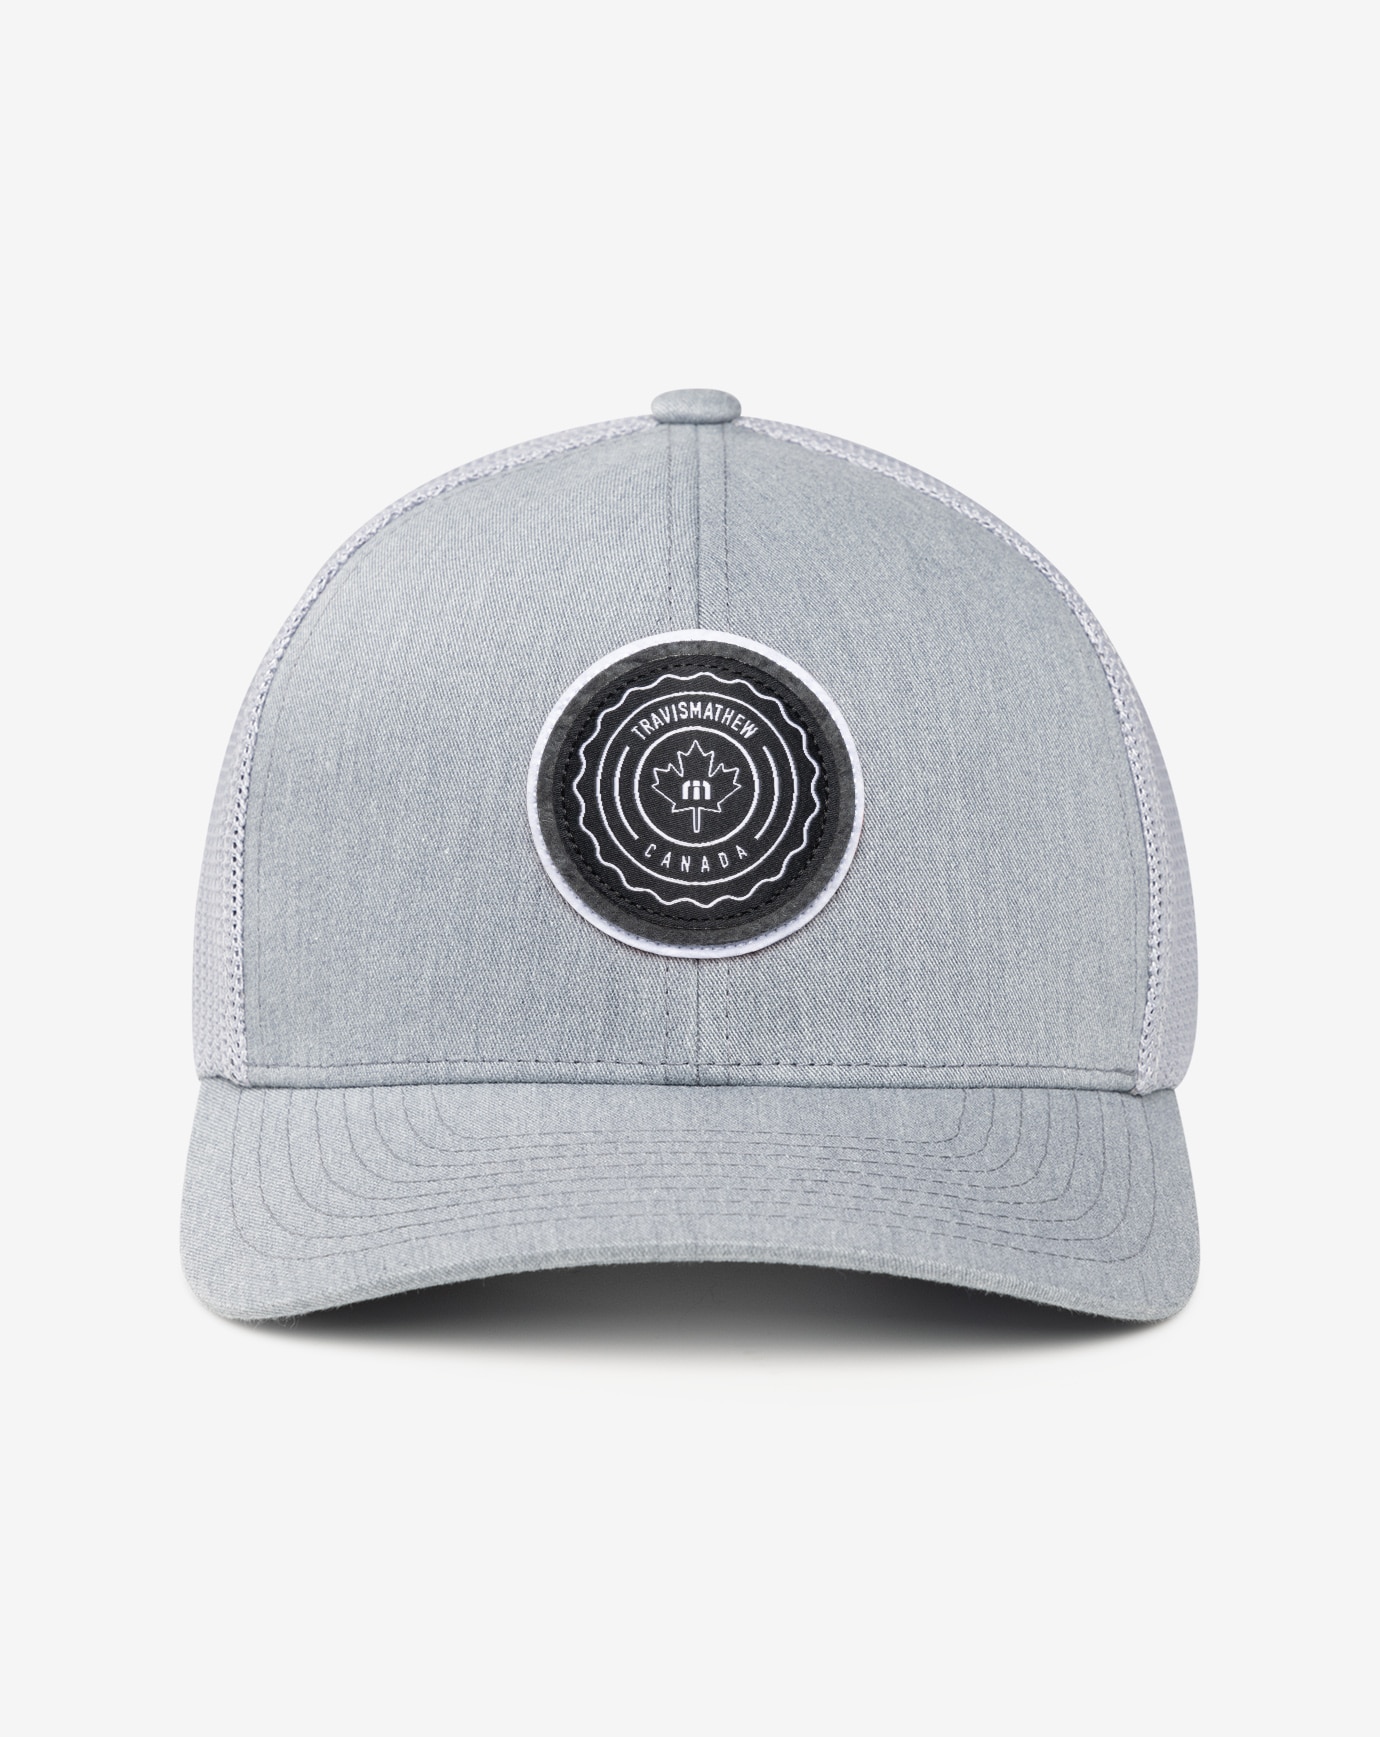 CAN PATCH SNAPBACK HAT Image Thumbnail 1